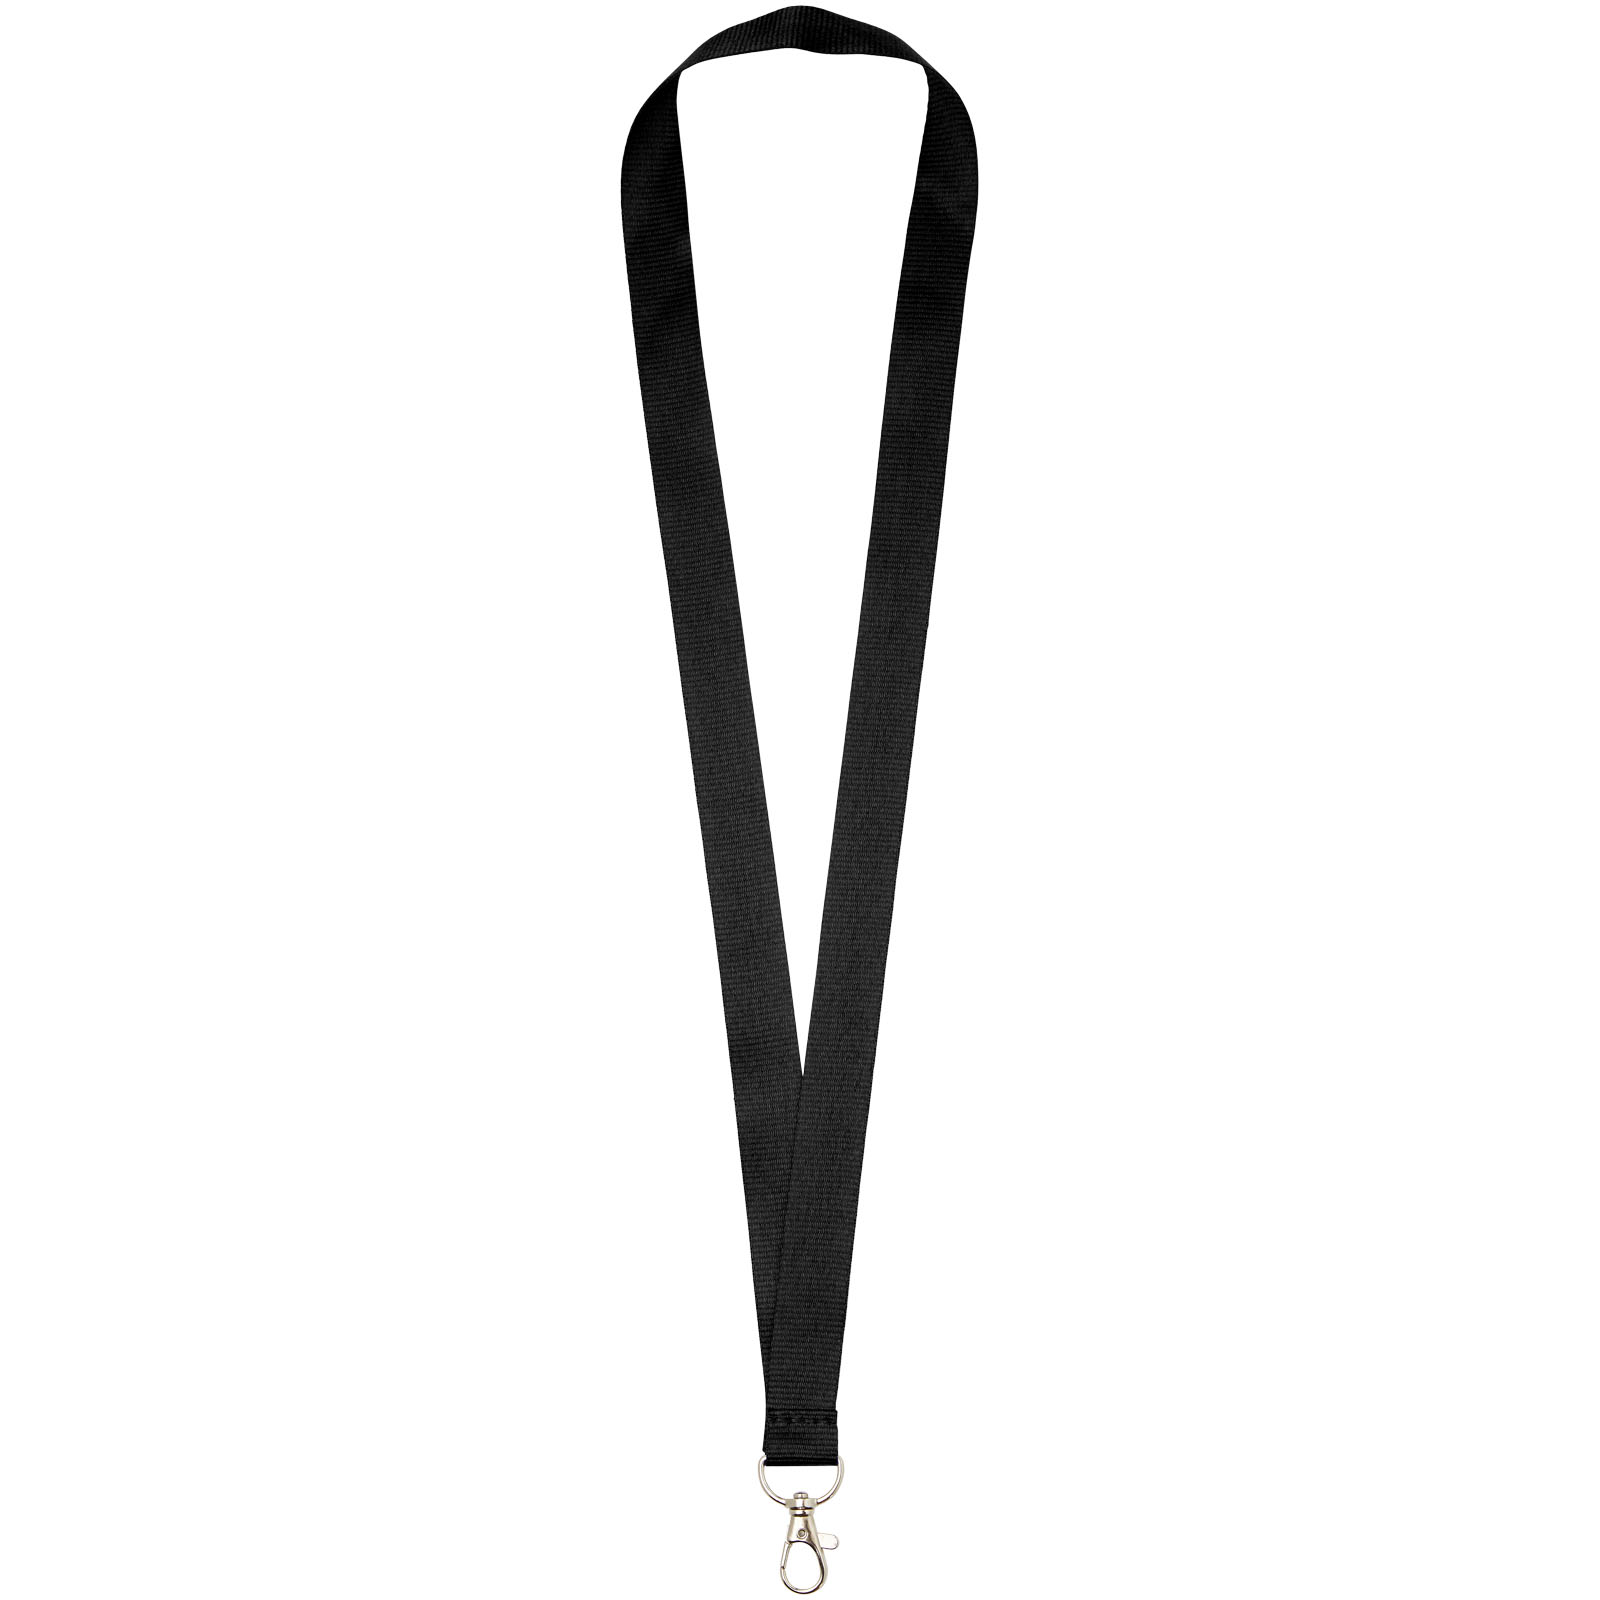 Lanyards - Impey lanyard with convenient hook